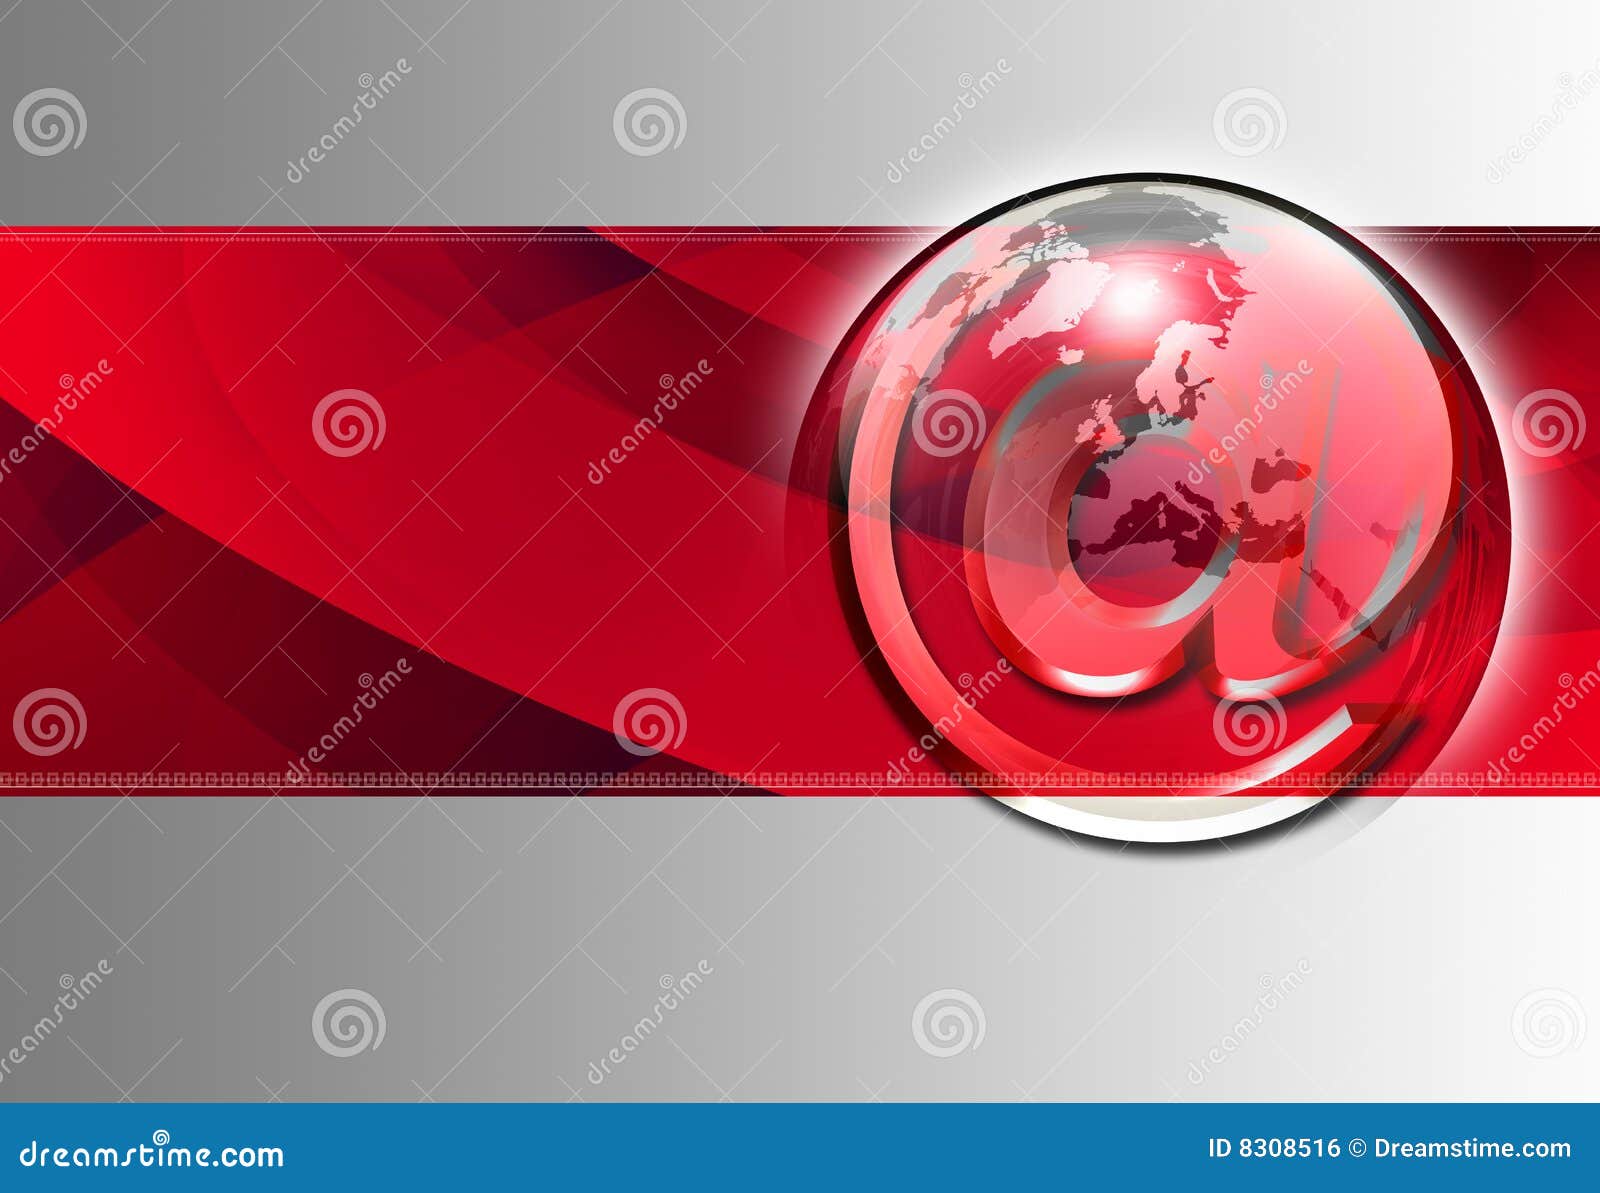 Red Business Card Background Royalty Free Stock Image - Image: 8308516